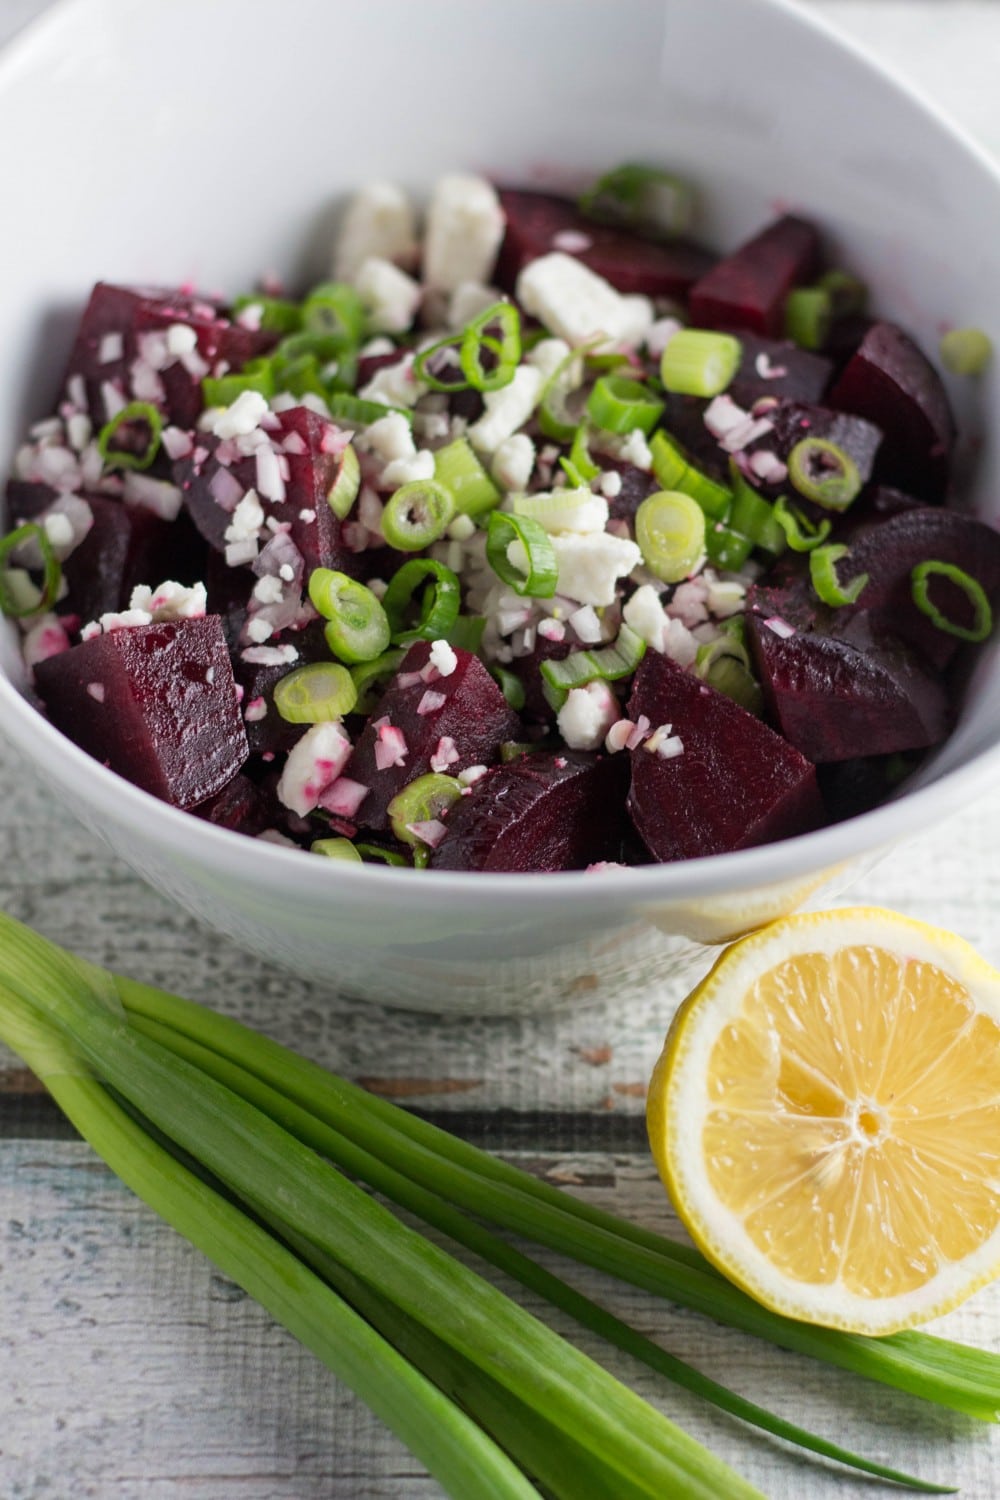 Image of Beets and green onions